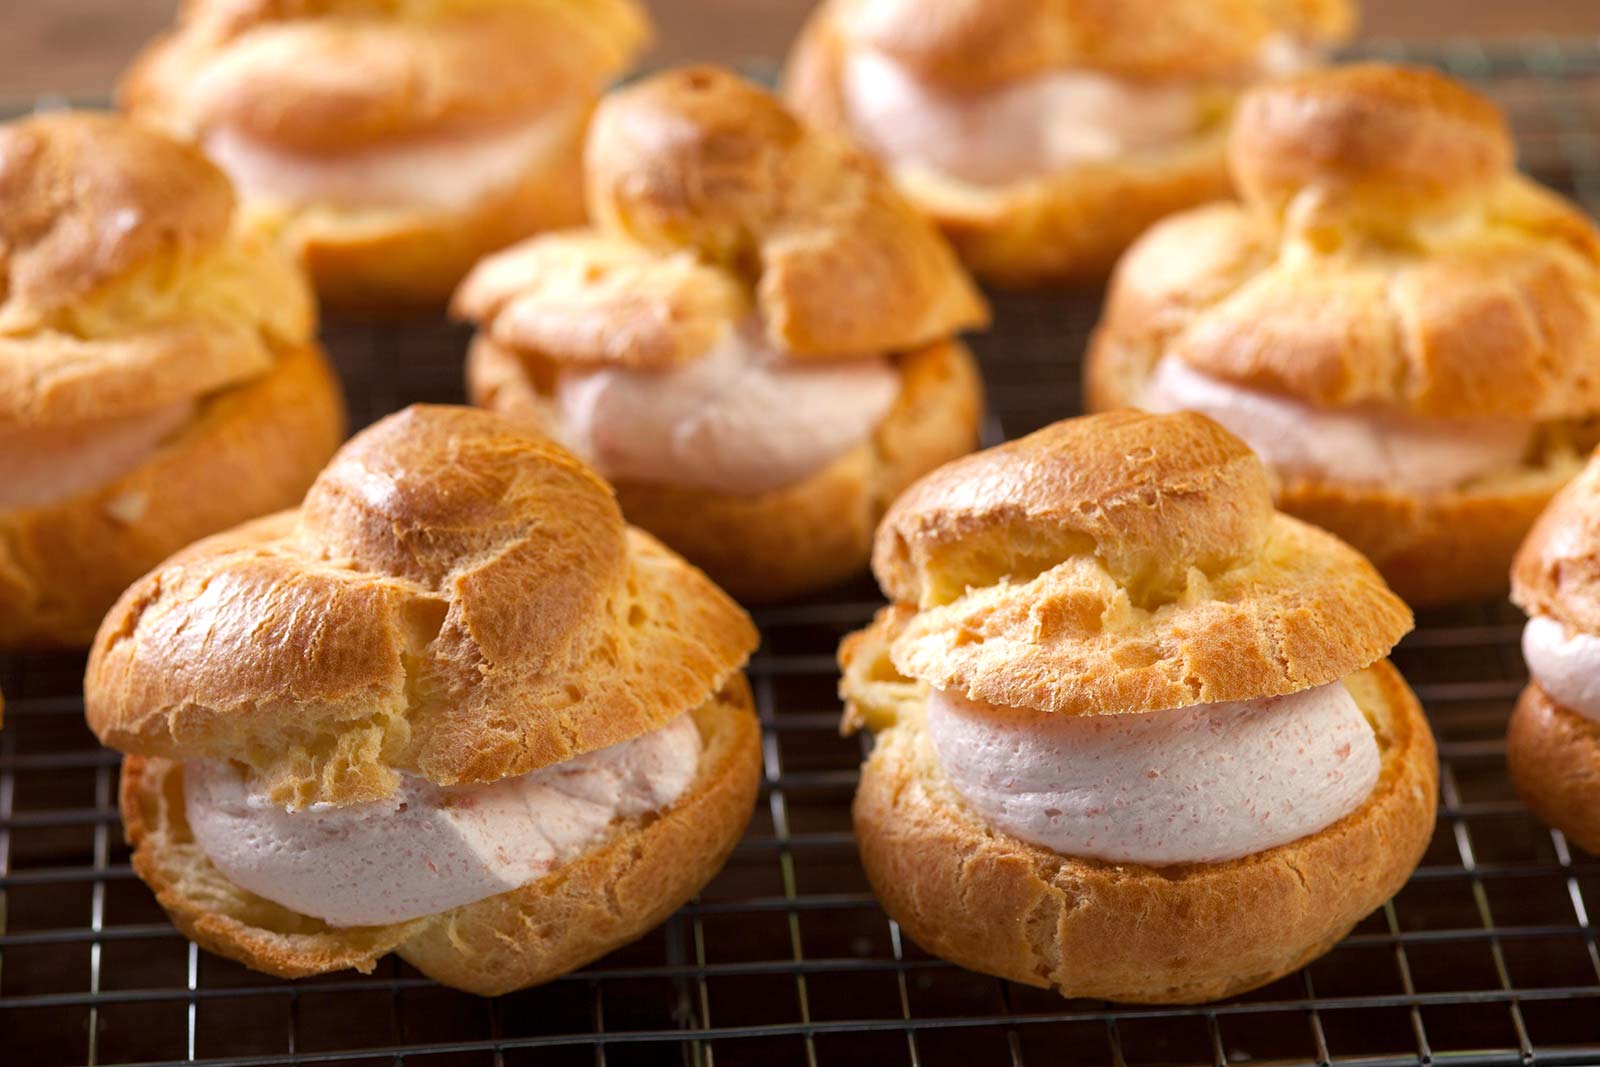 🥖 How Many Baked Goods Have You Tried from Around the World? Cream Puffs